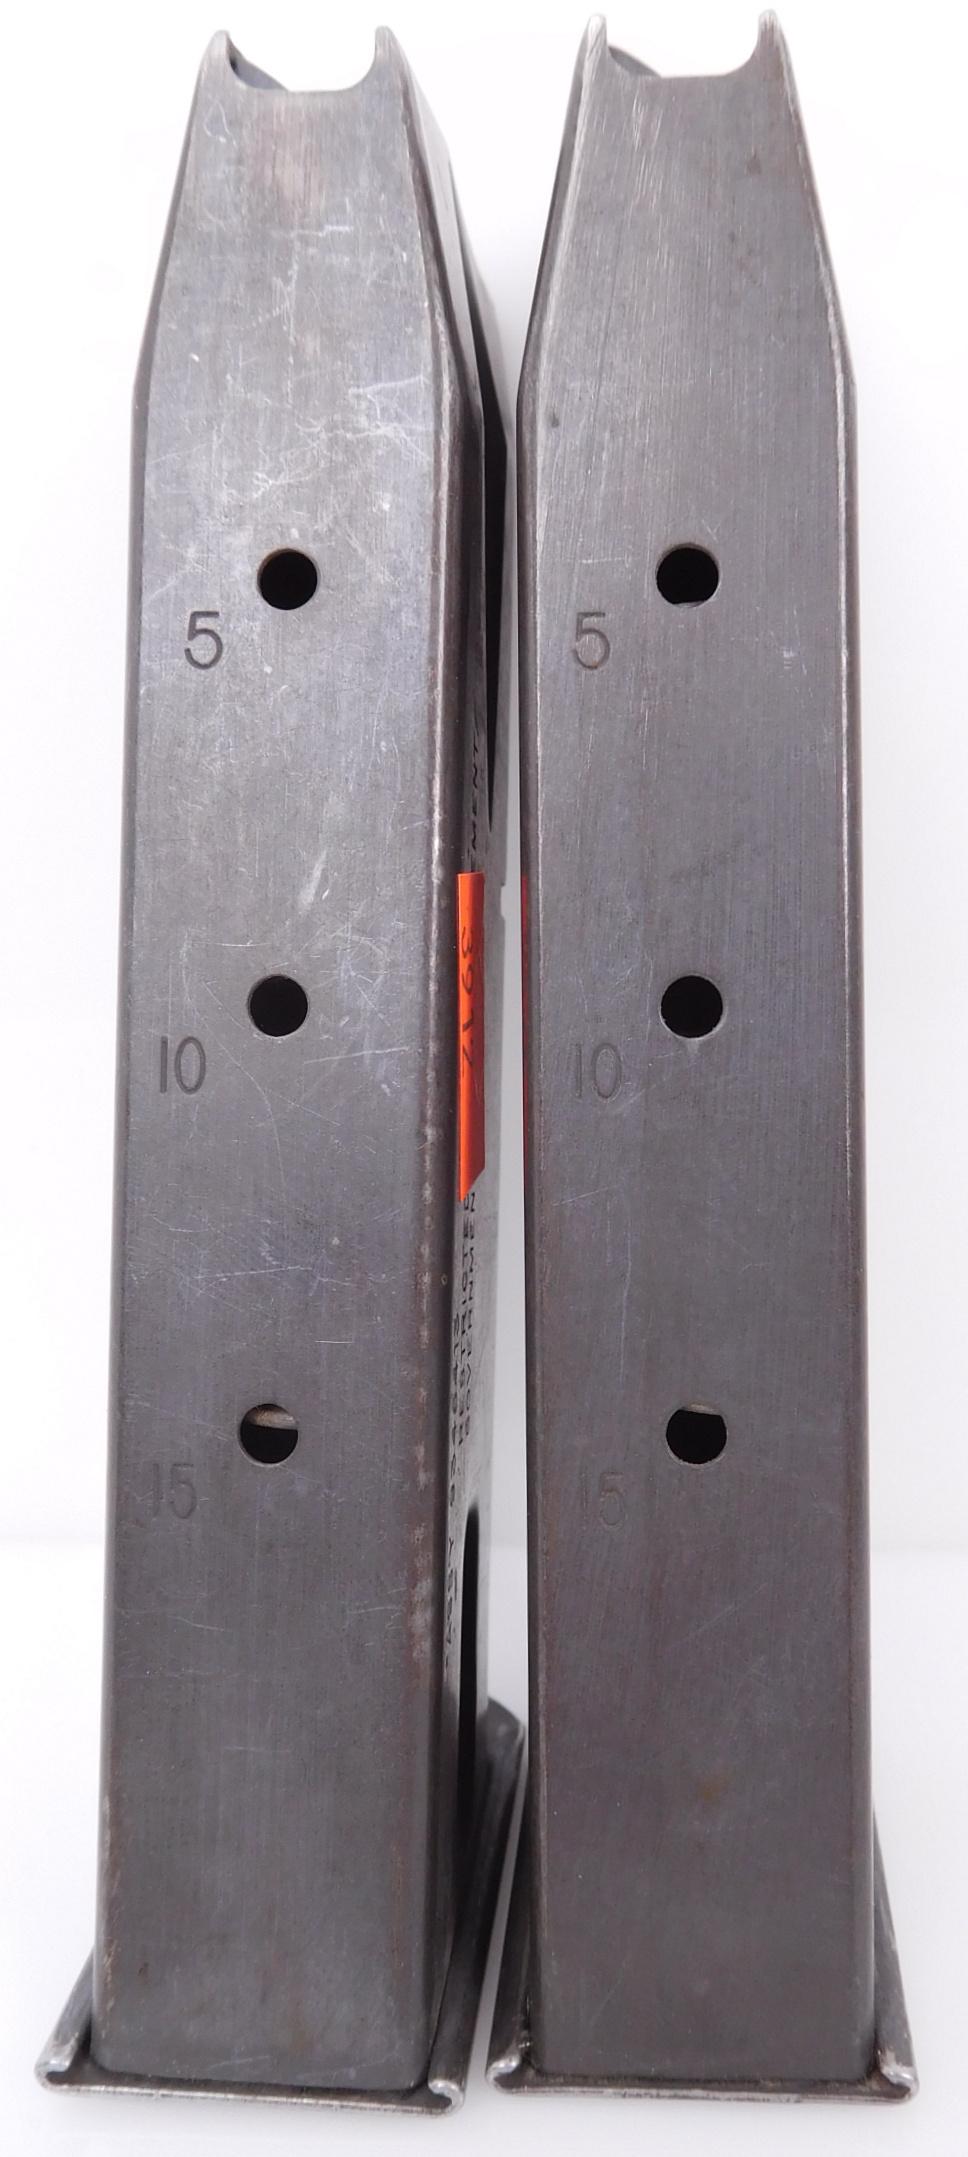 3 High Capacity Pistol Mags. To Include One 15 Rd. S&W .40/.357 Mag, Two Check-Mate 15 Rd. 9 MM Mags